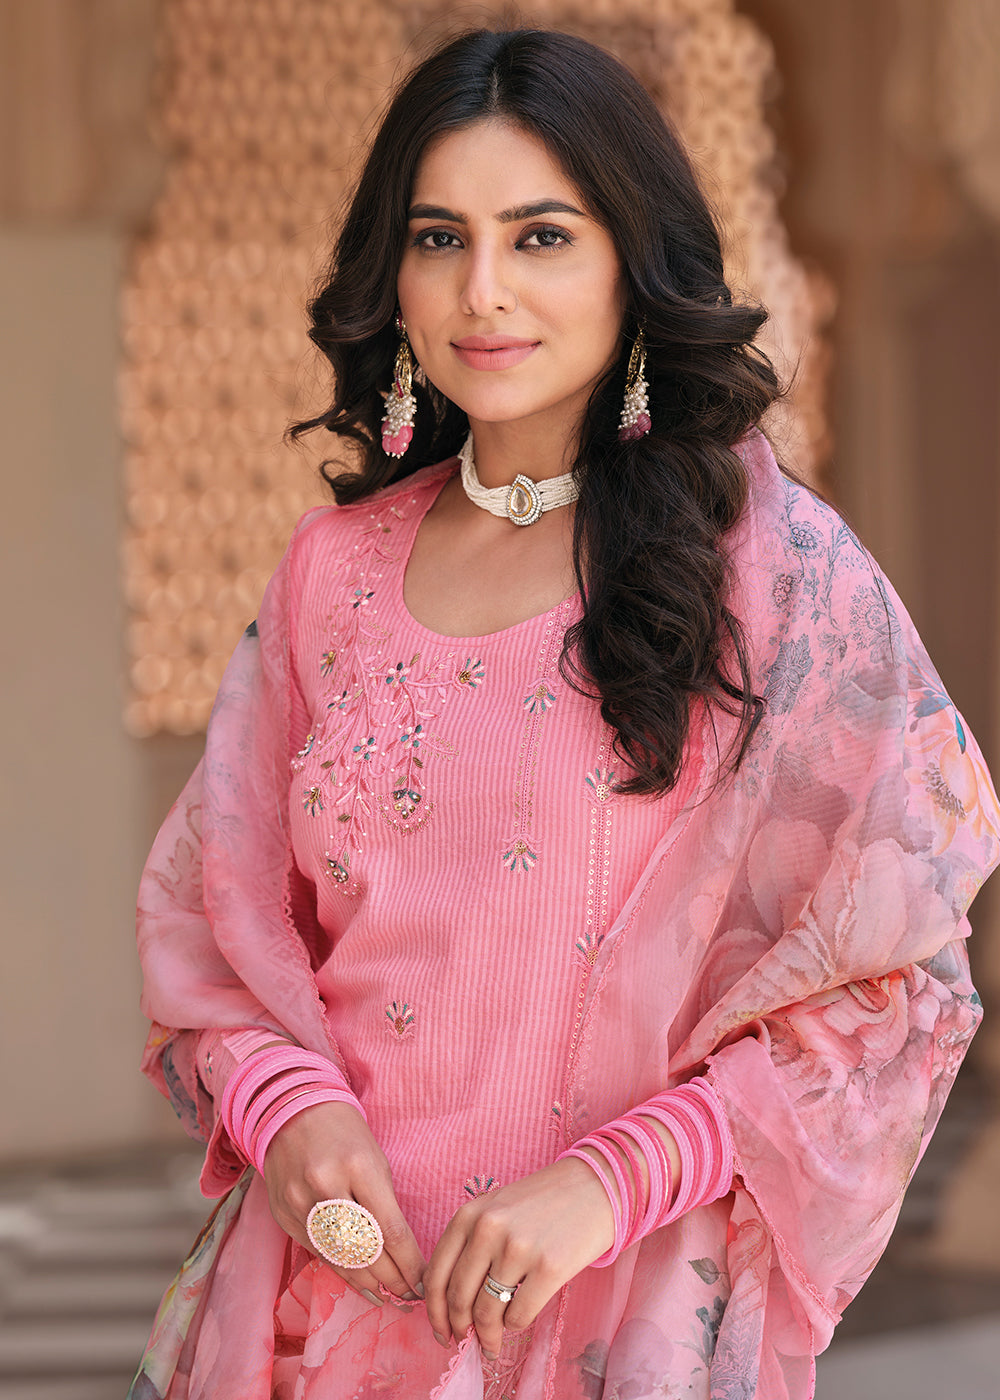 Buy Now Superior Pink Cotton Khatli Hand Work Casual Salwar Suit Online in USA, UK, Canada, Germany, Australia & Worldwide at Empress Clothing.